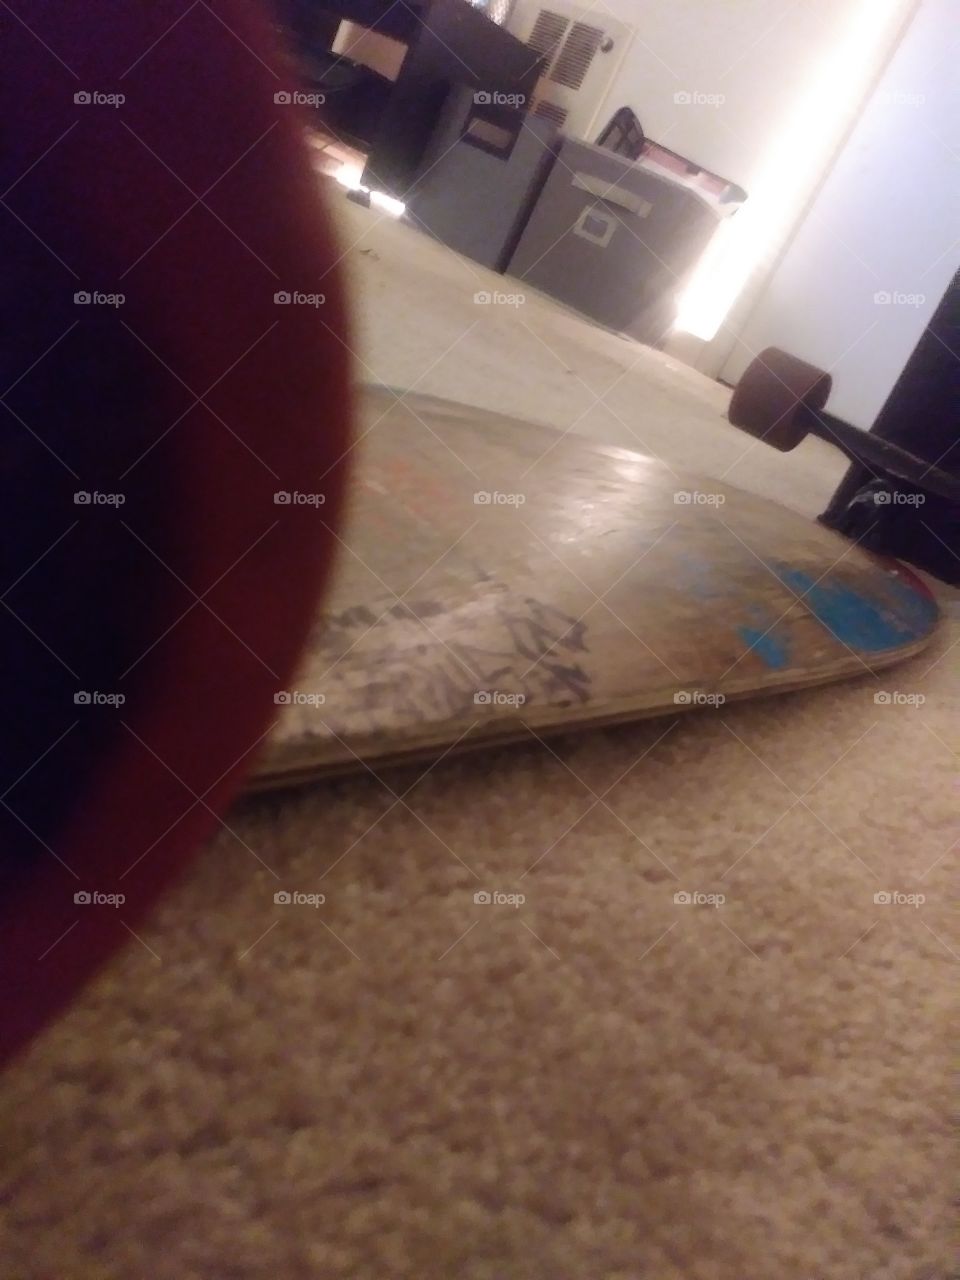 just a basic but cool pic I took of my longboard